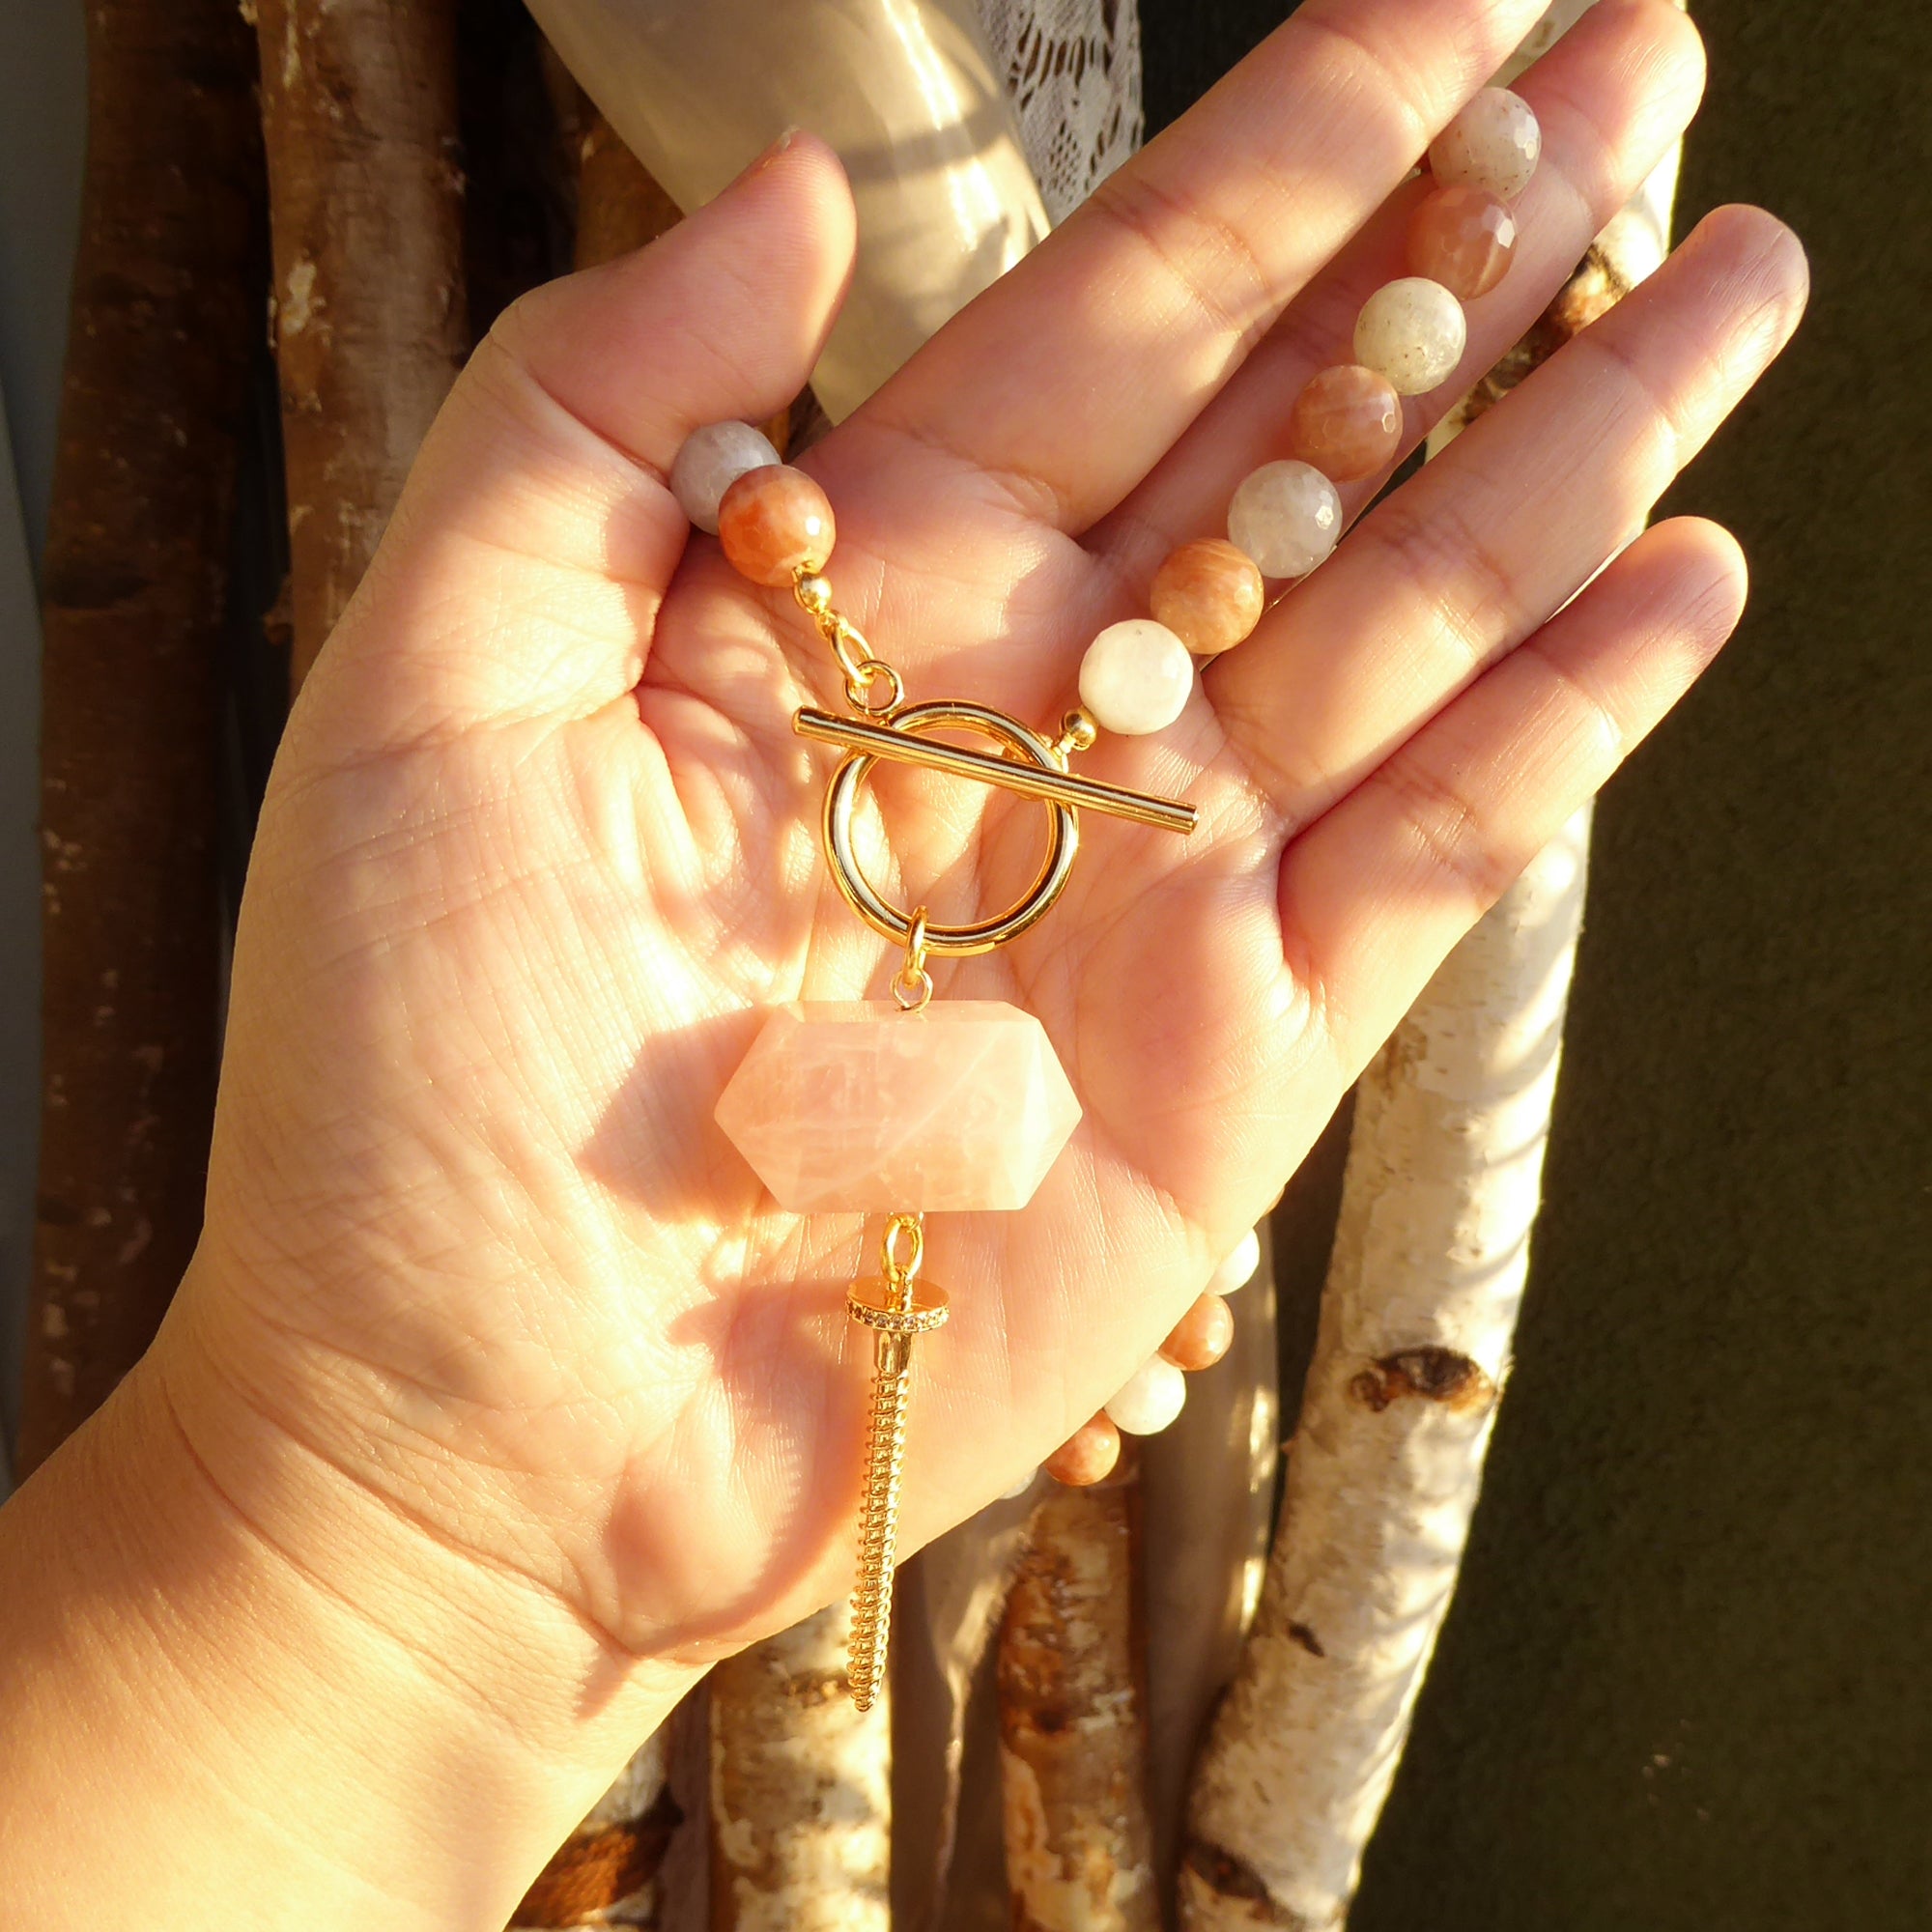 Moonstone and rose quartz screw necklace by Jenny Dayco 11